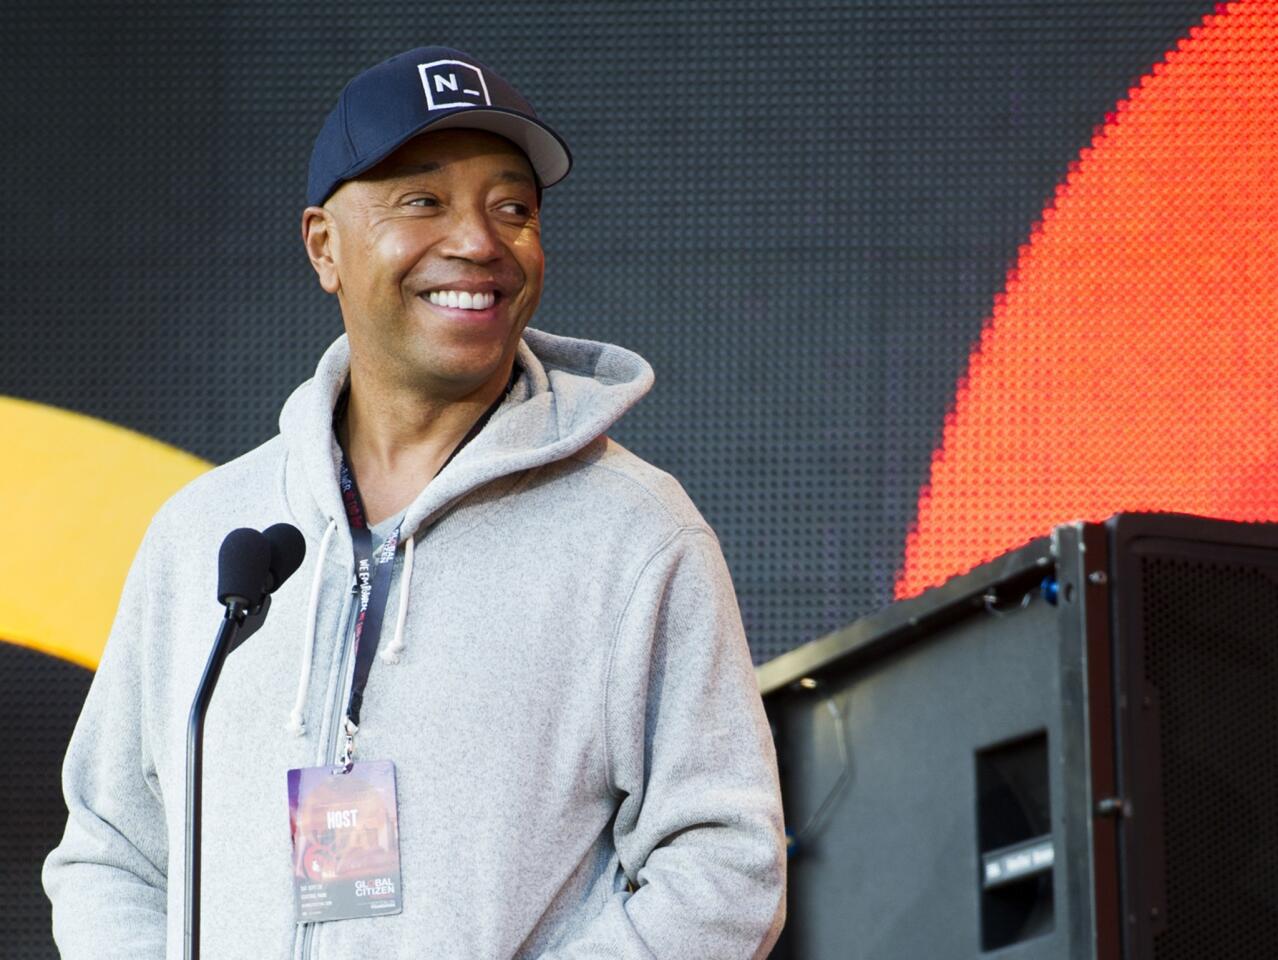 "Nelson Mandela was an angel walking on this earth. You were one the greatest teachers this world has ever known. We love you and we miss you" — @UncleRUSH